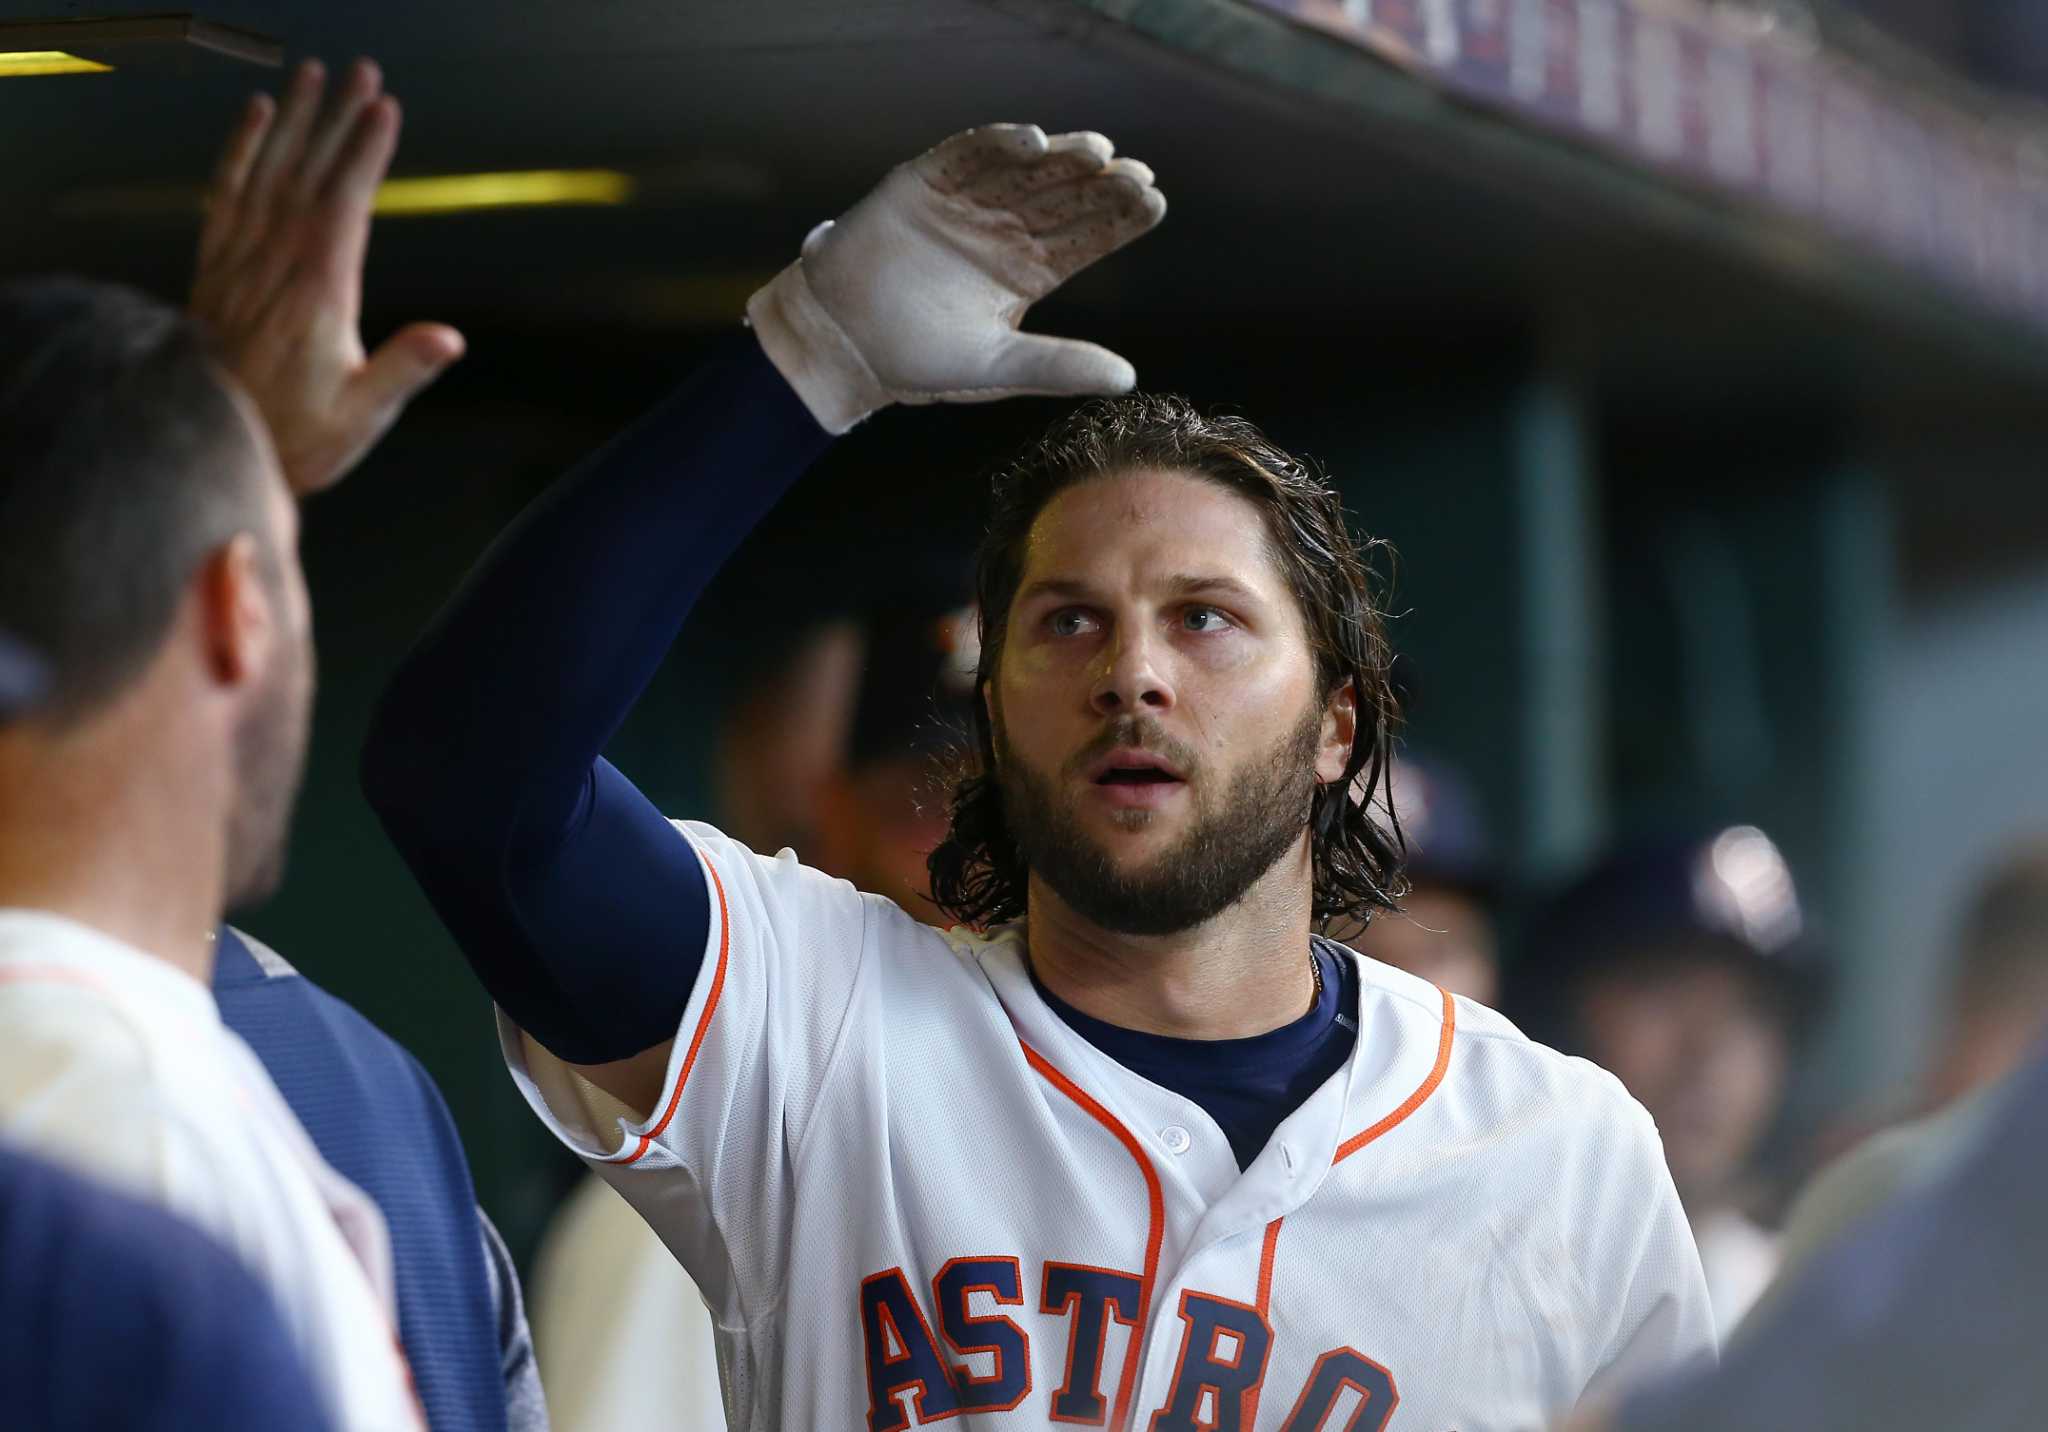 Astros outfielder Jake Marisnick showing signs batting slump may be over